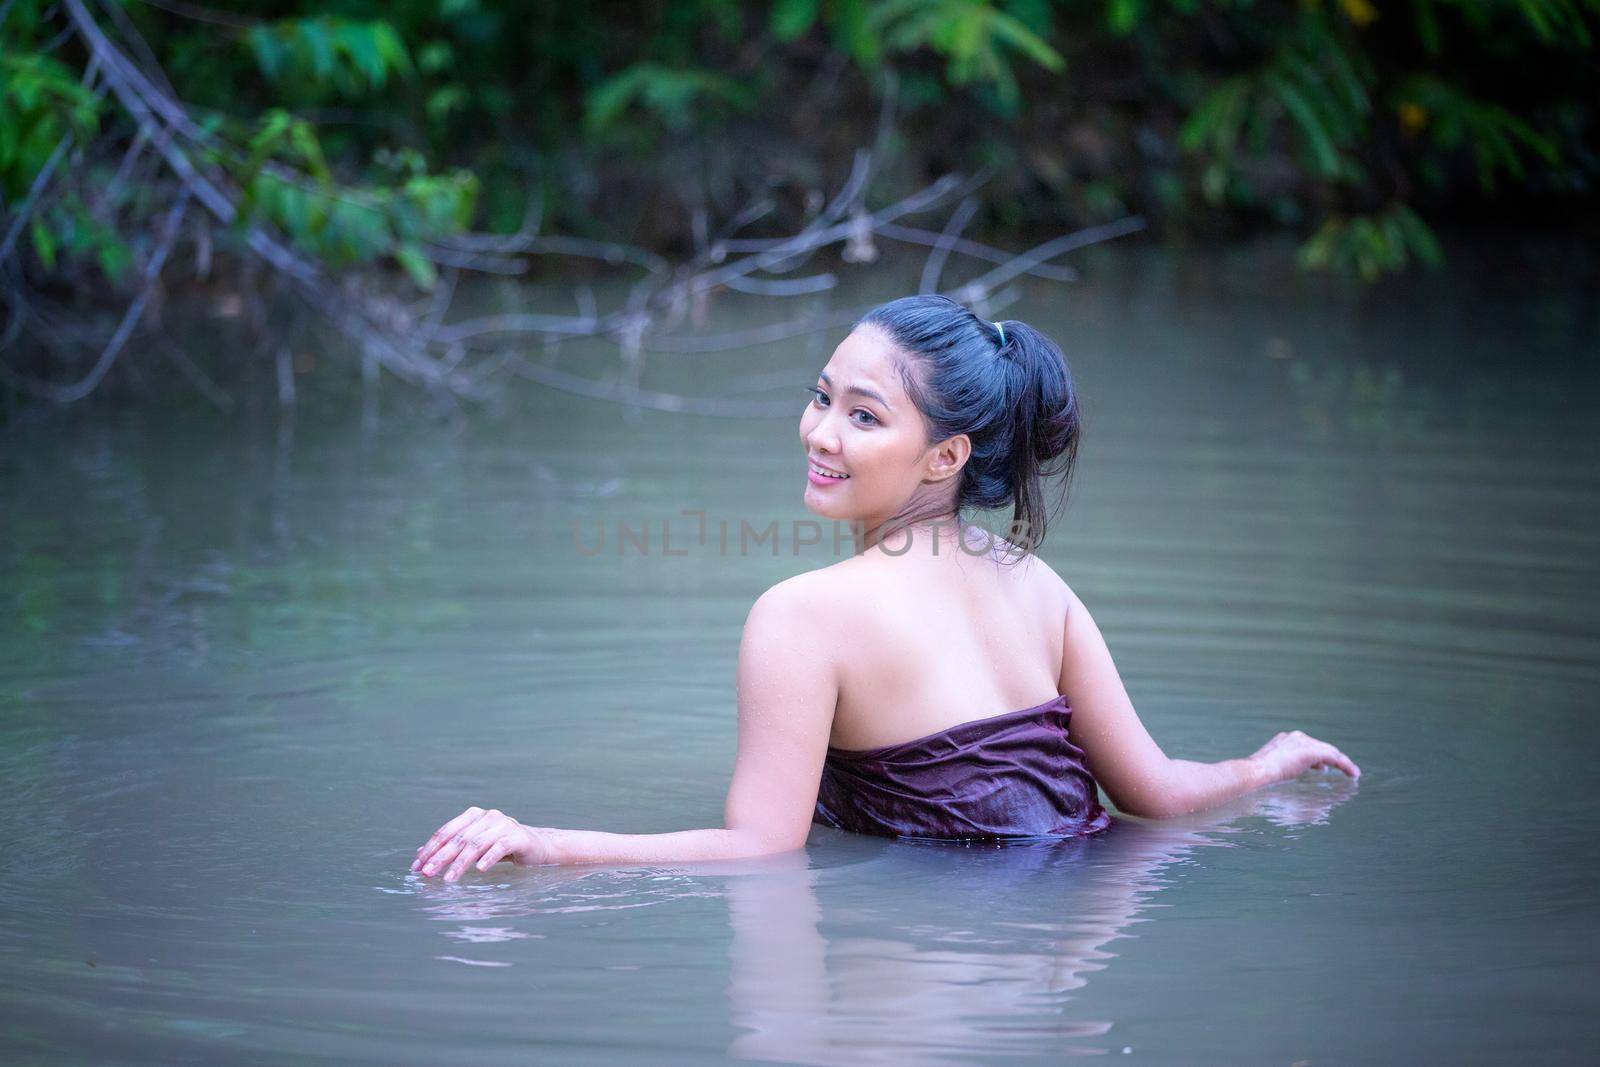 Beautiful Asian women are bathing in the river. Asia girl in Thailand. Asian girl take a shower outdoor from a traditional bamboo chute,countryside Thailand.